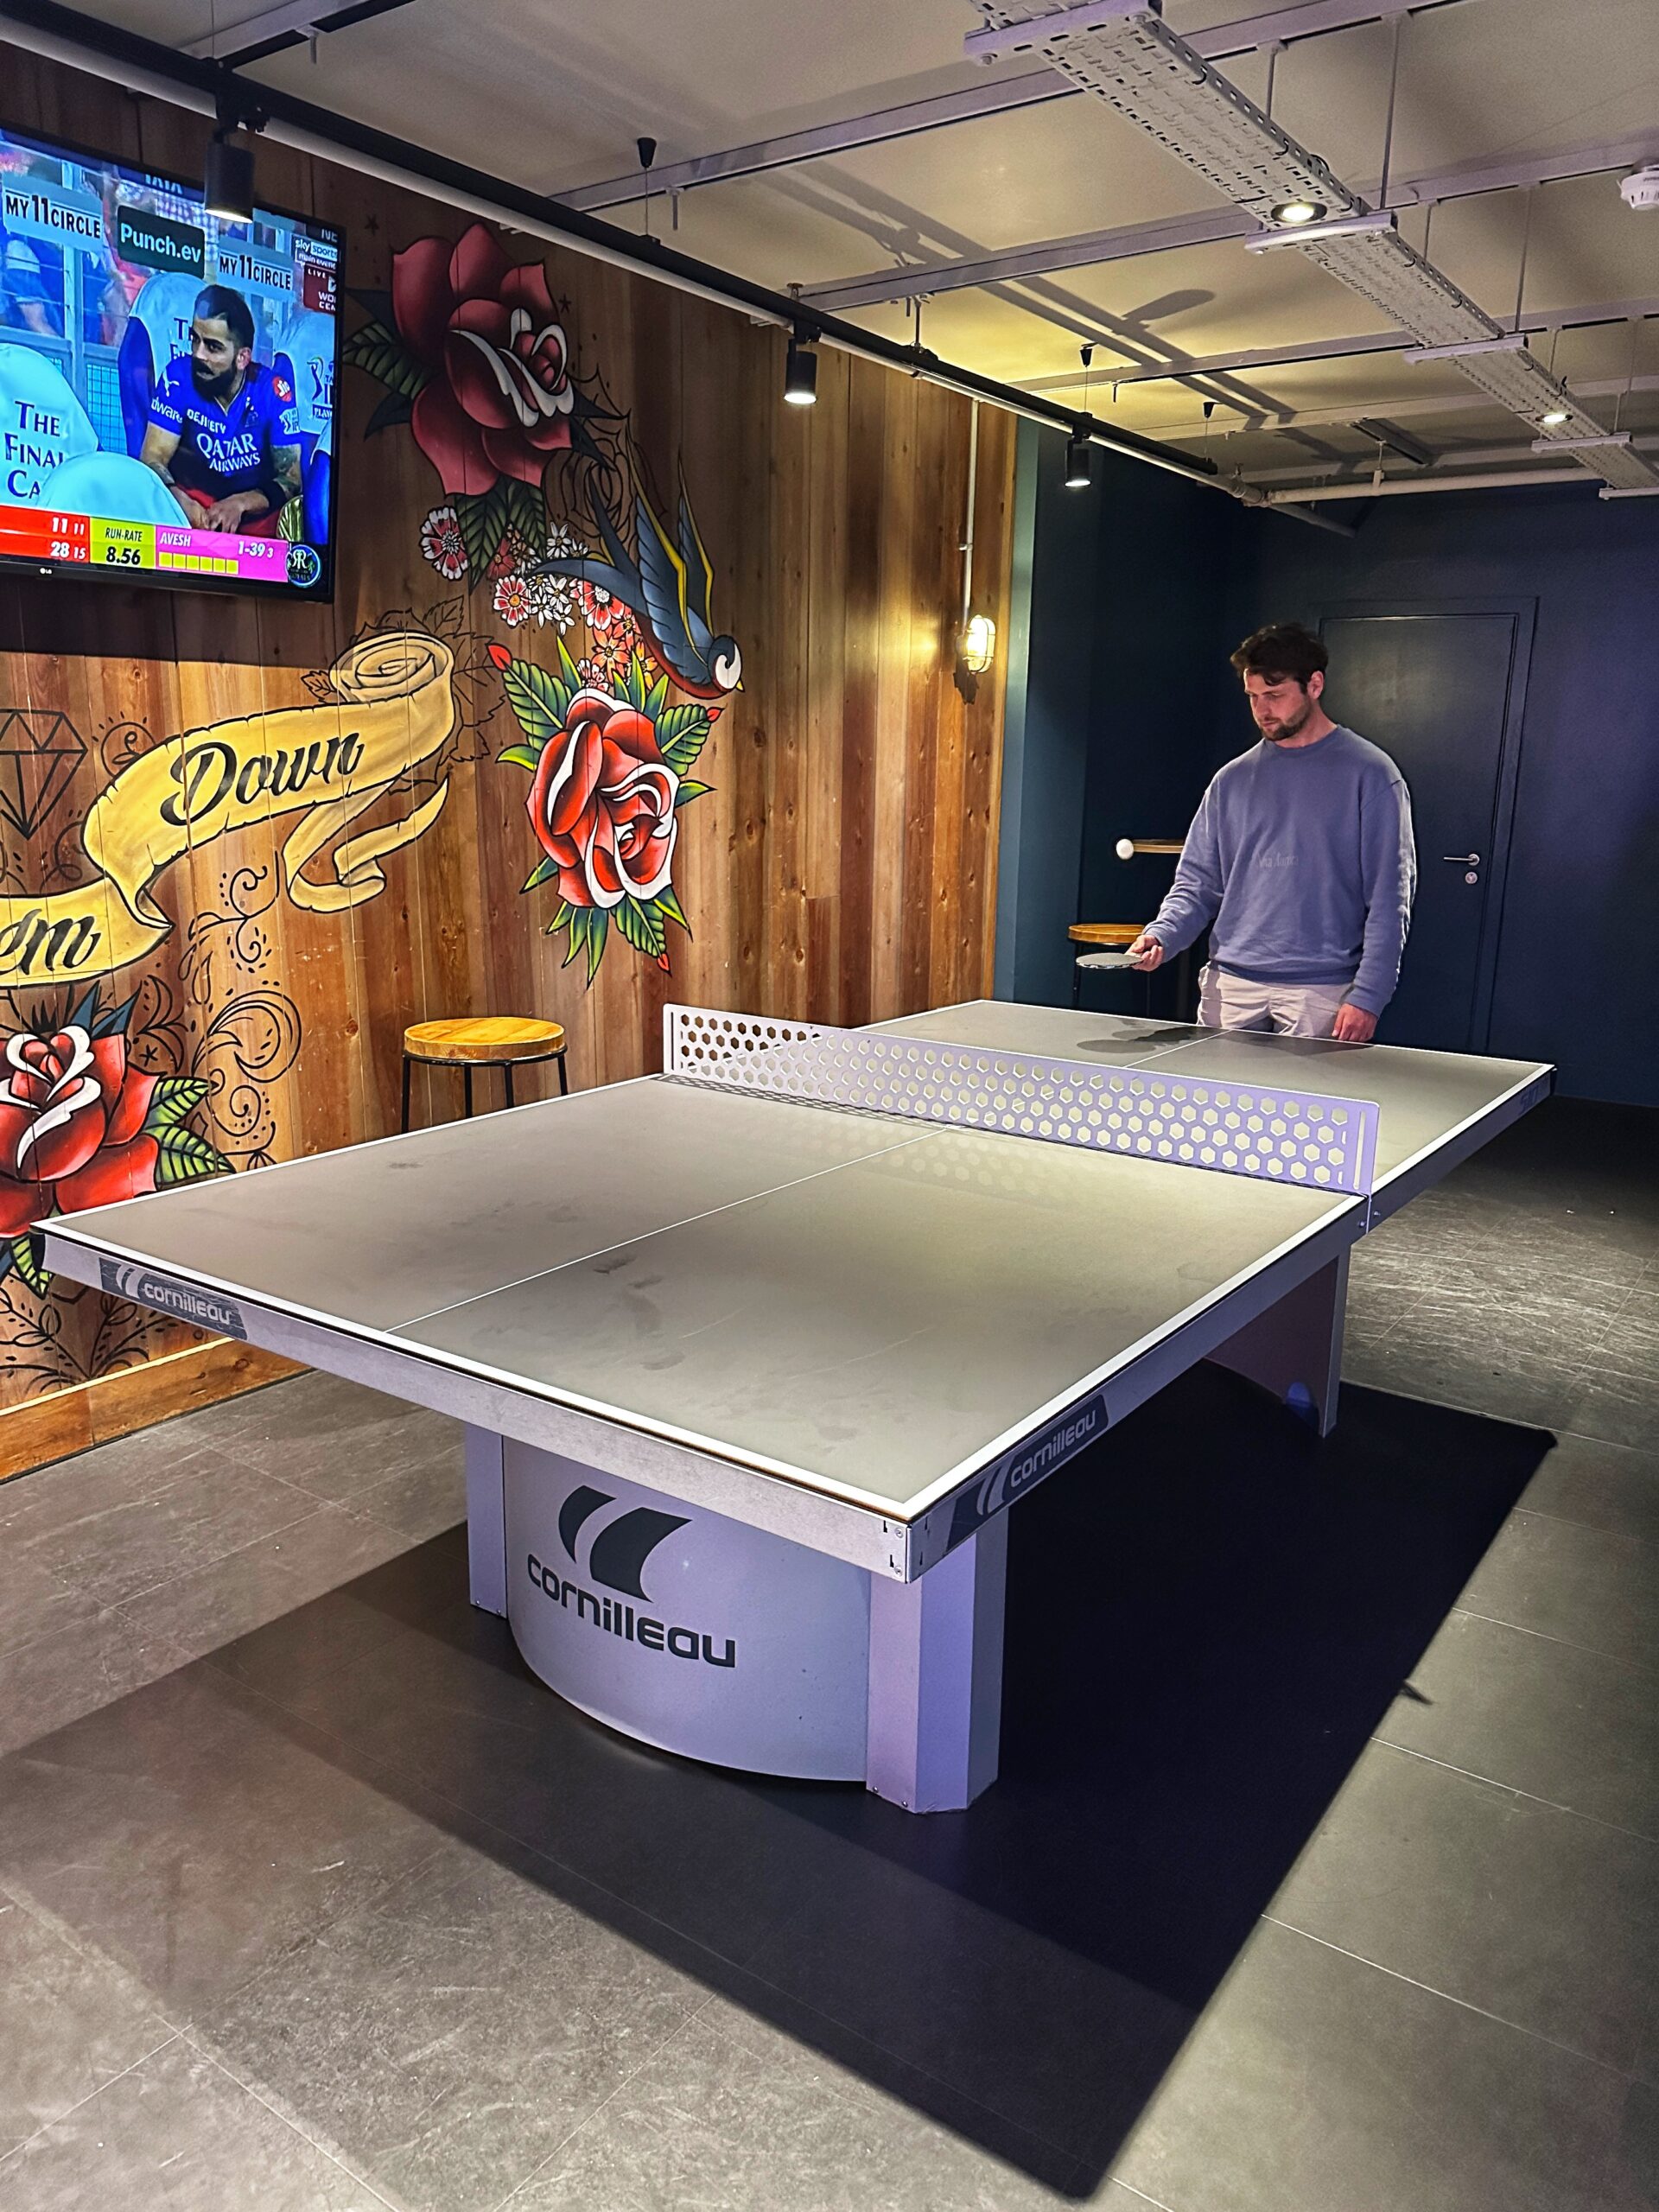 You can play pool at table tennis at Tenpin Manchester Printworks